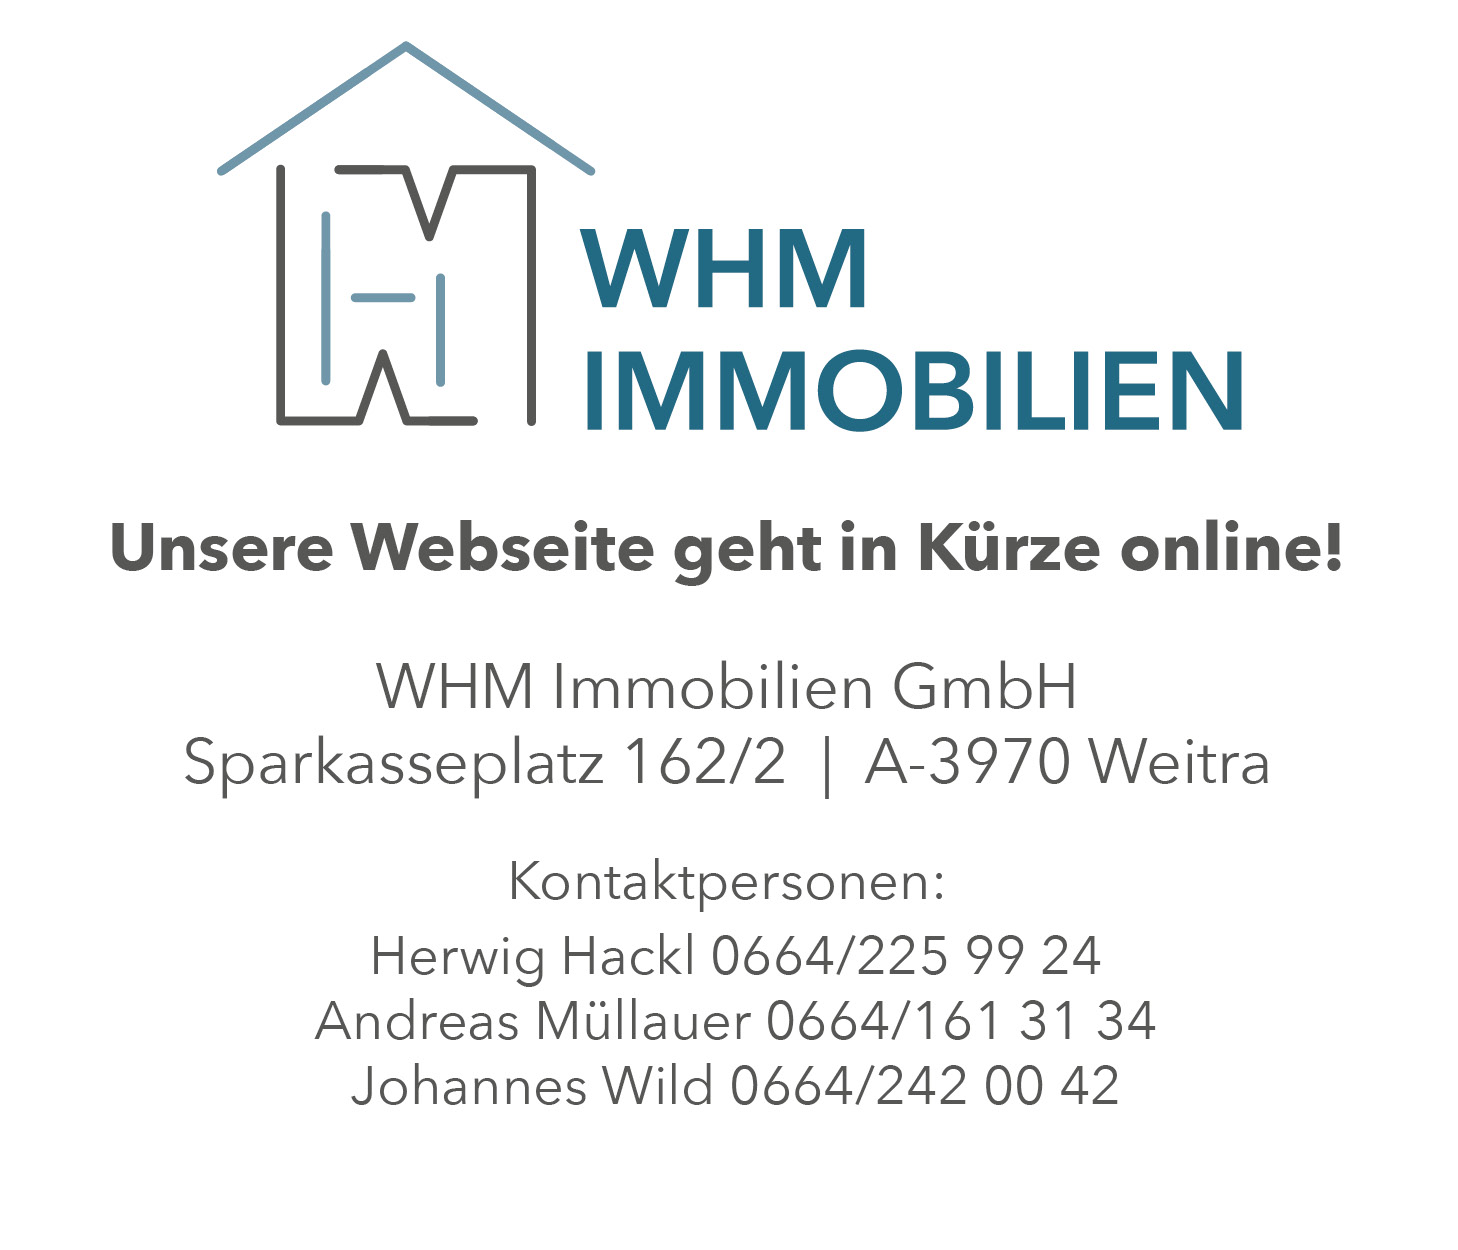 WHM, Immobilien, Weitra